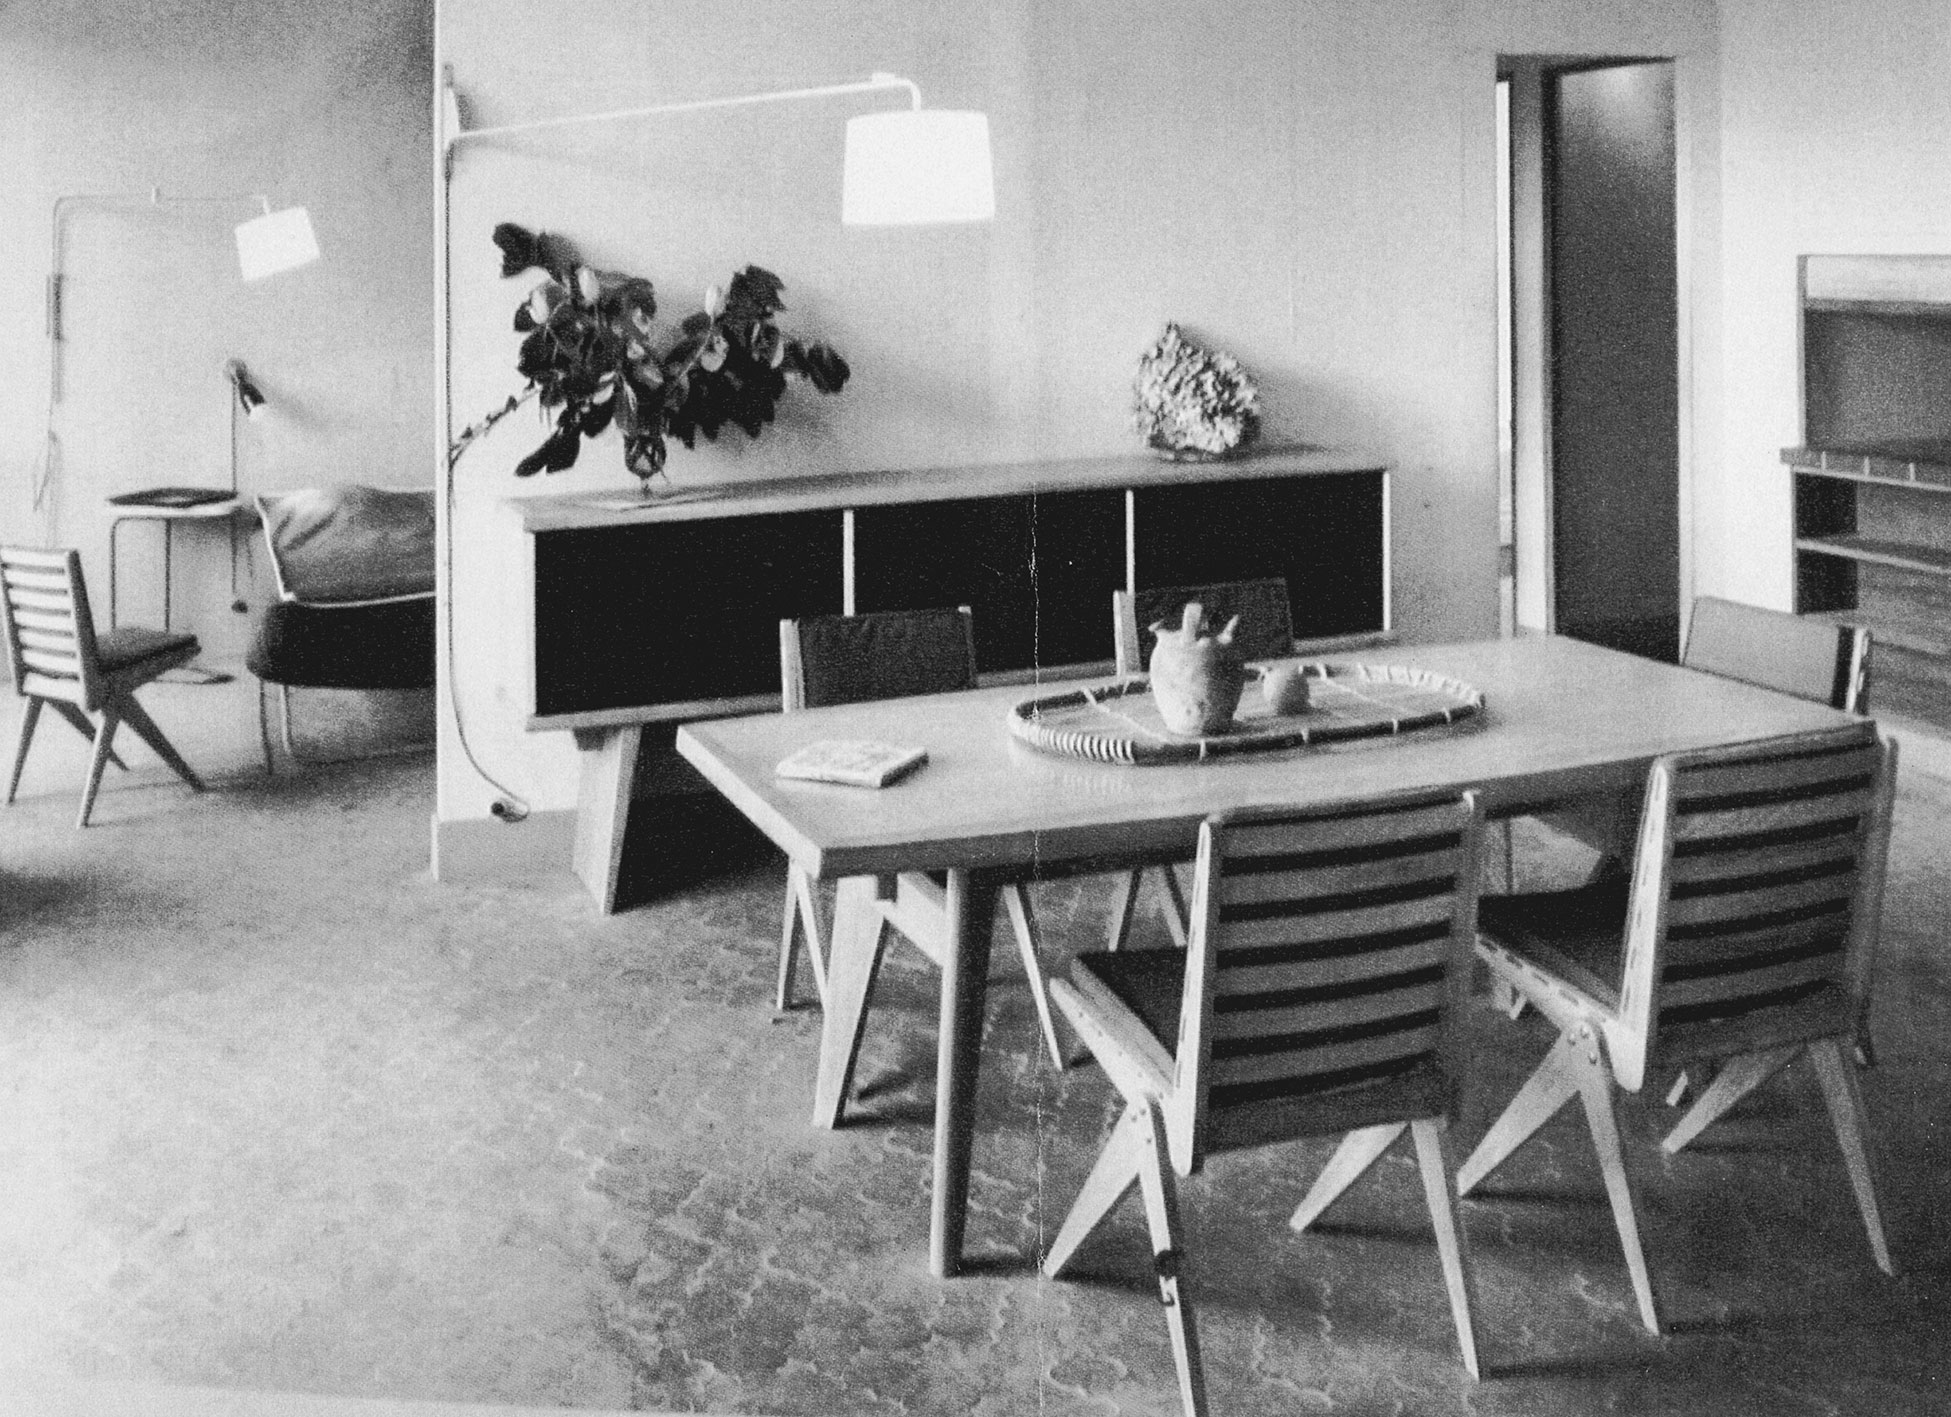 Prototype apartment of the La Frontal building, Toulon, France (J. de Mailly, architect, 1950-1955). Large model presented at the exhibition Habitation, Salon des arts ménagers, Paris, 1951. Pierre Jeanneret and Charlotte Perriand furniture. Swing jib lamp by the Ateliers Jean Prouvé.